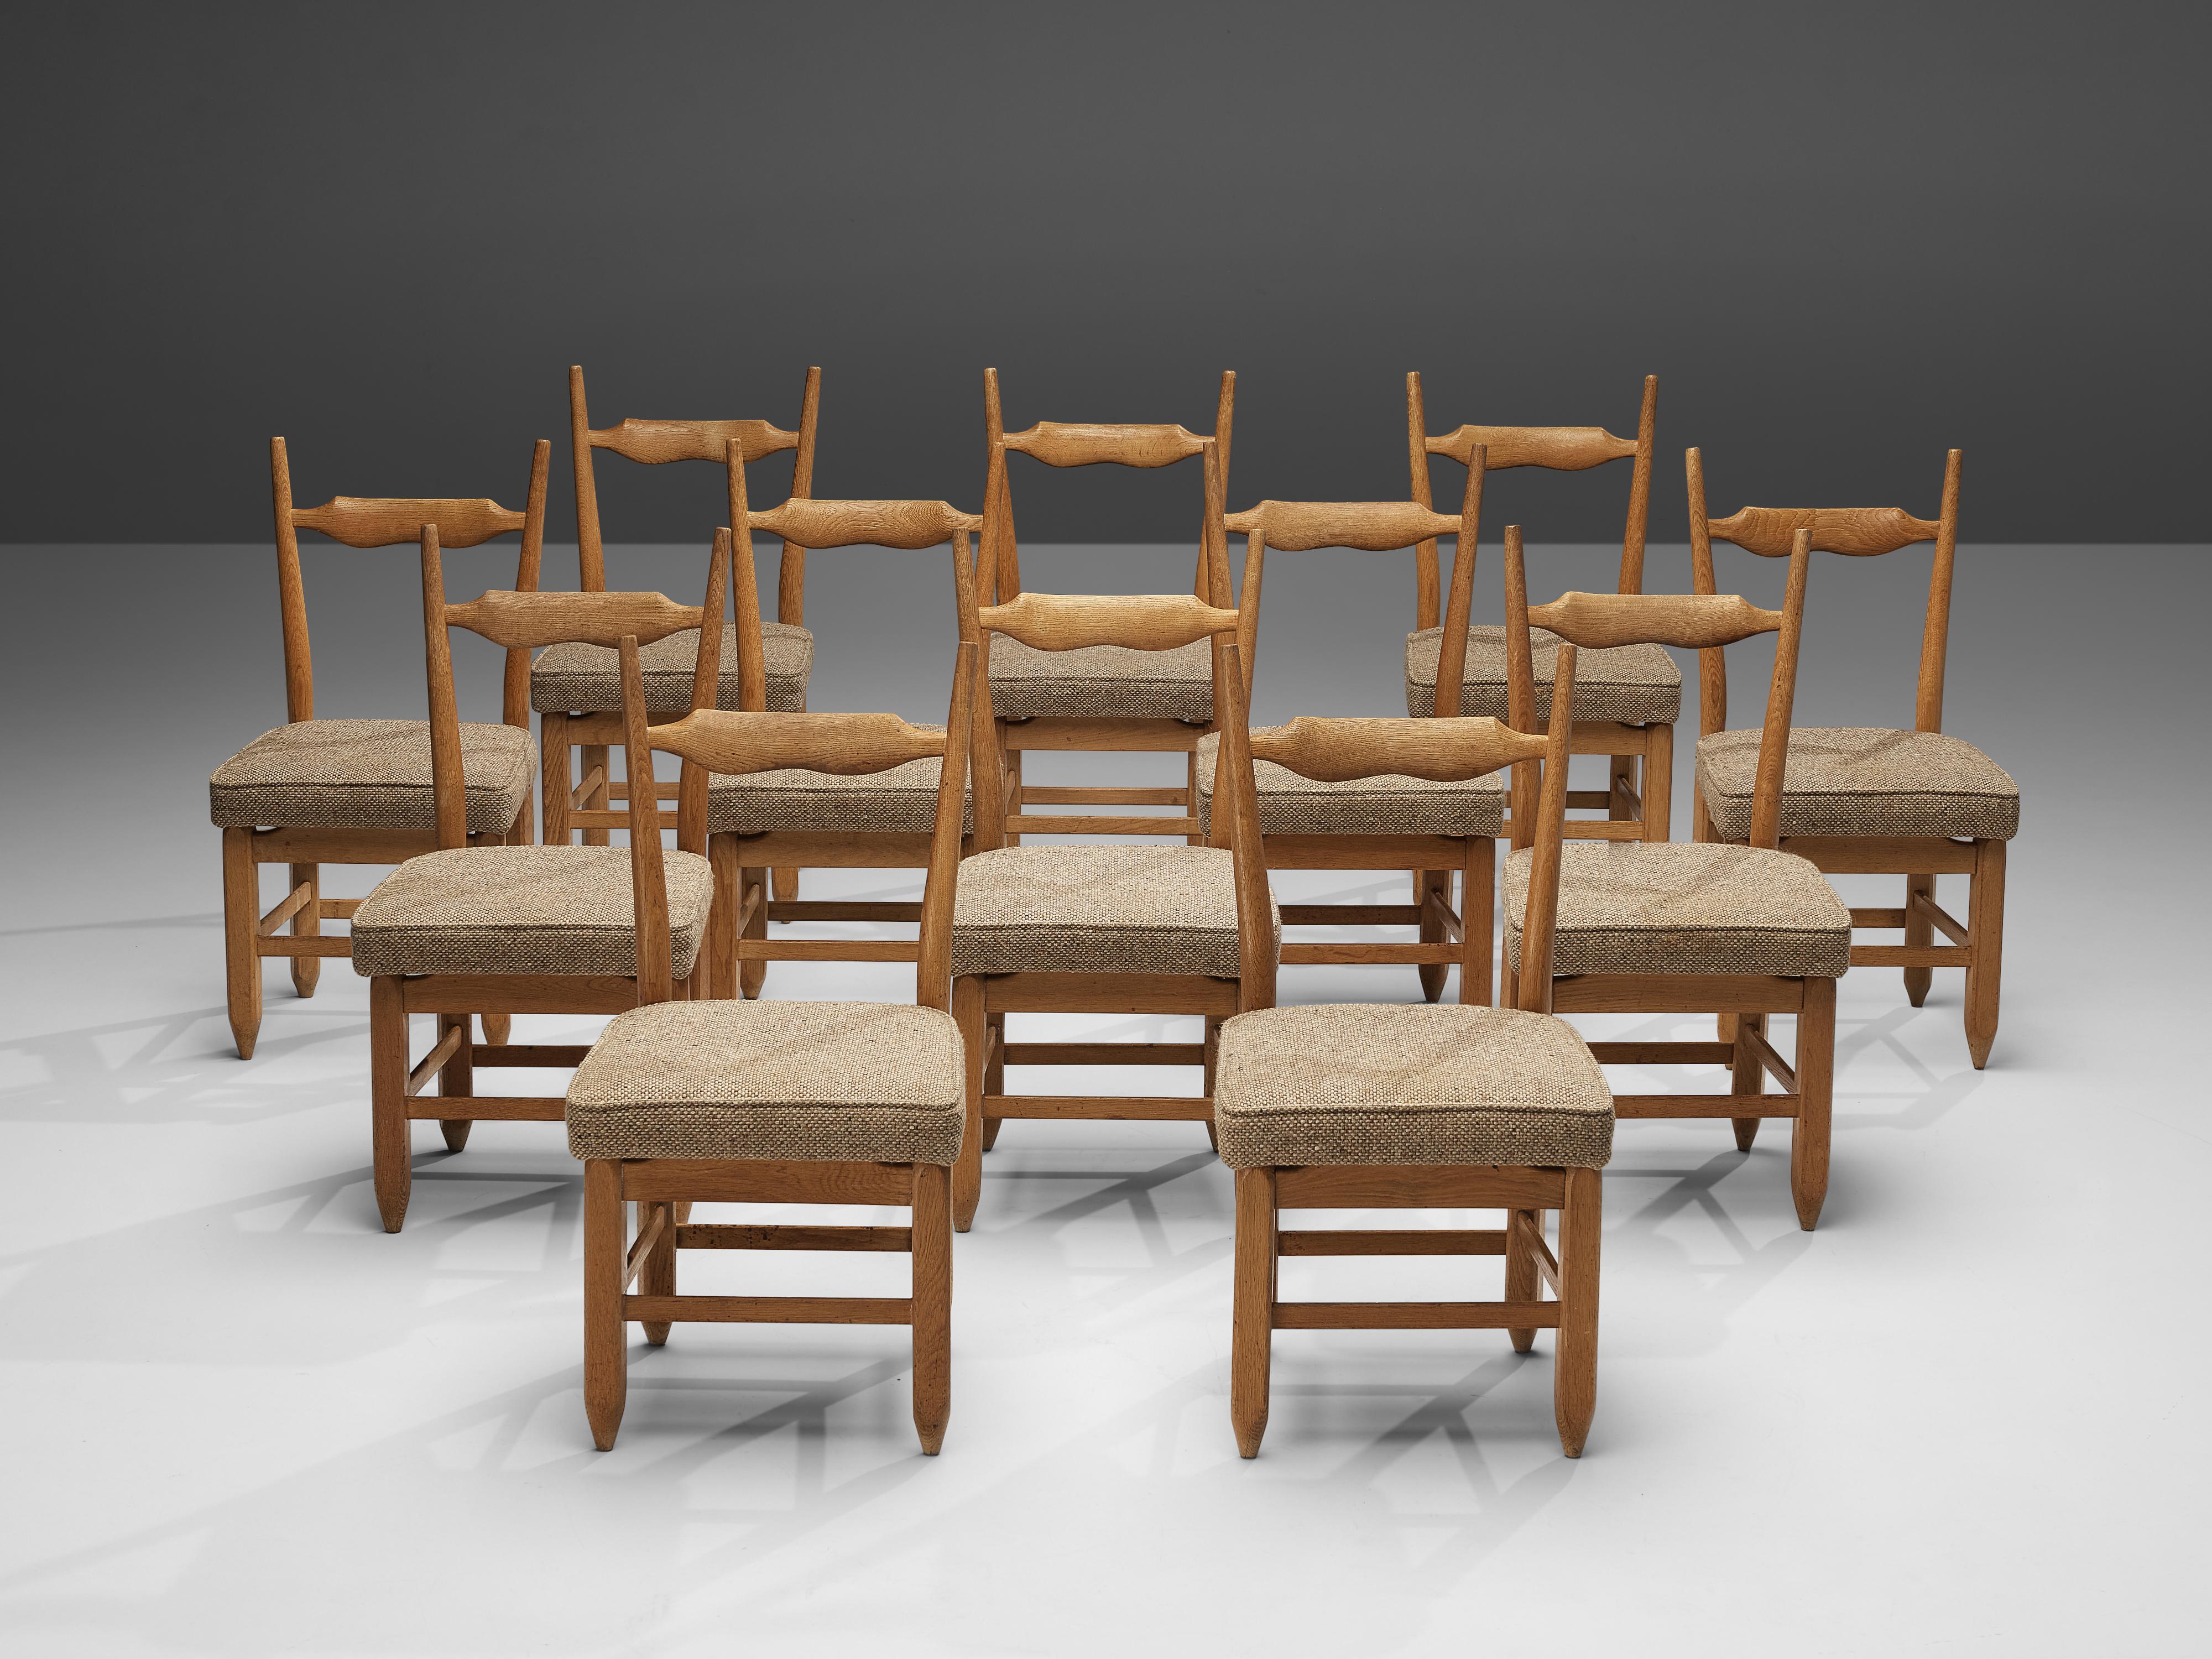 Robert Guillerme et Jacques Chambron for Votre Maison, set of twelve dining chairs, oak and fabric, France, 1960s

Set of twelve elegant dining chairs in solid oak by Guillerme and Chambron. These chairs show the characteristics of this French